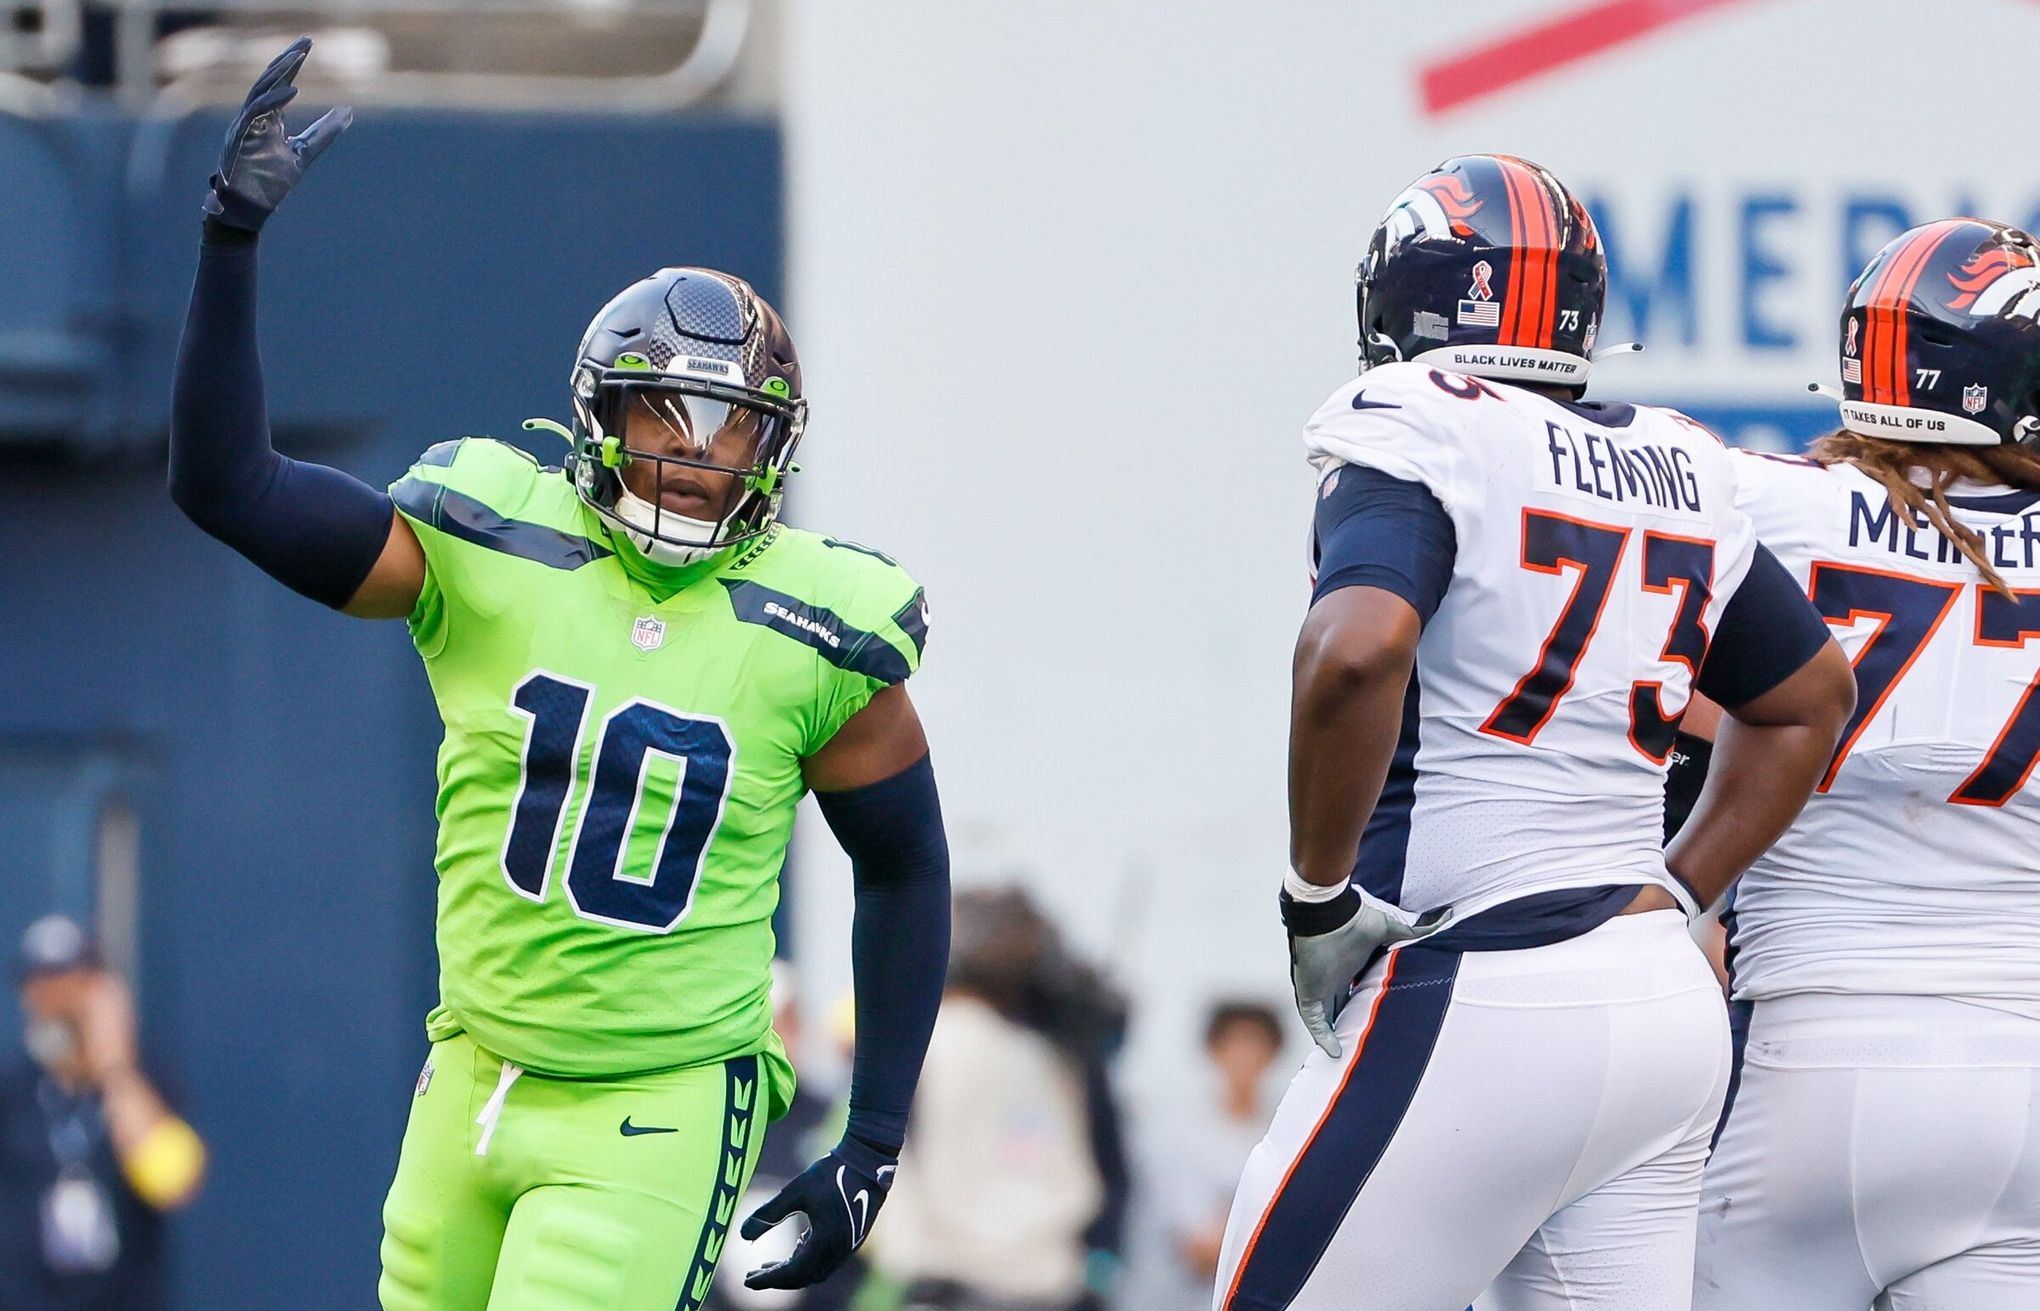 Broncos scouting report: How Denver matches up against Seahawks